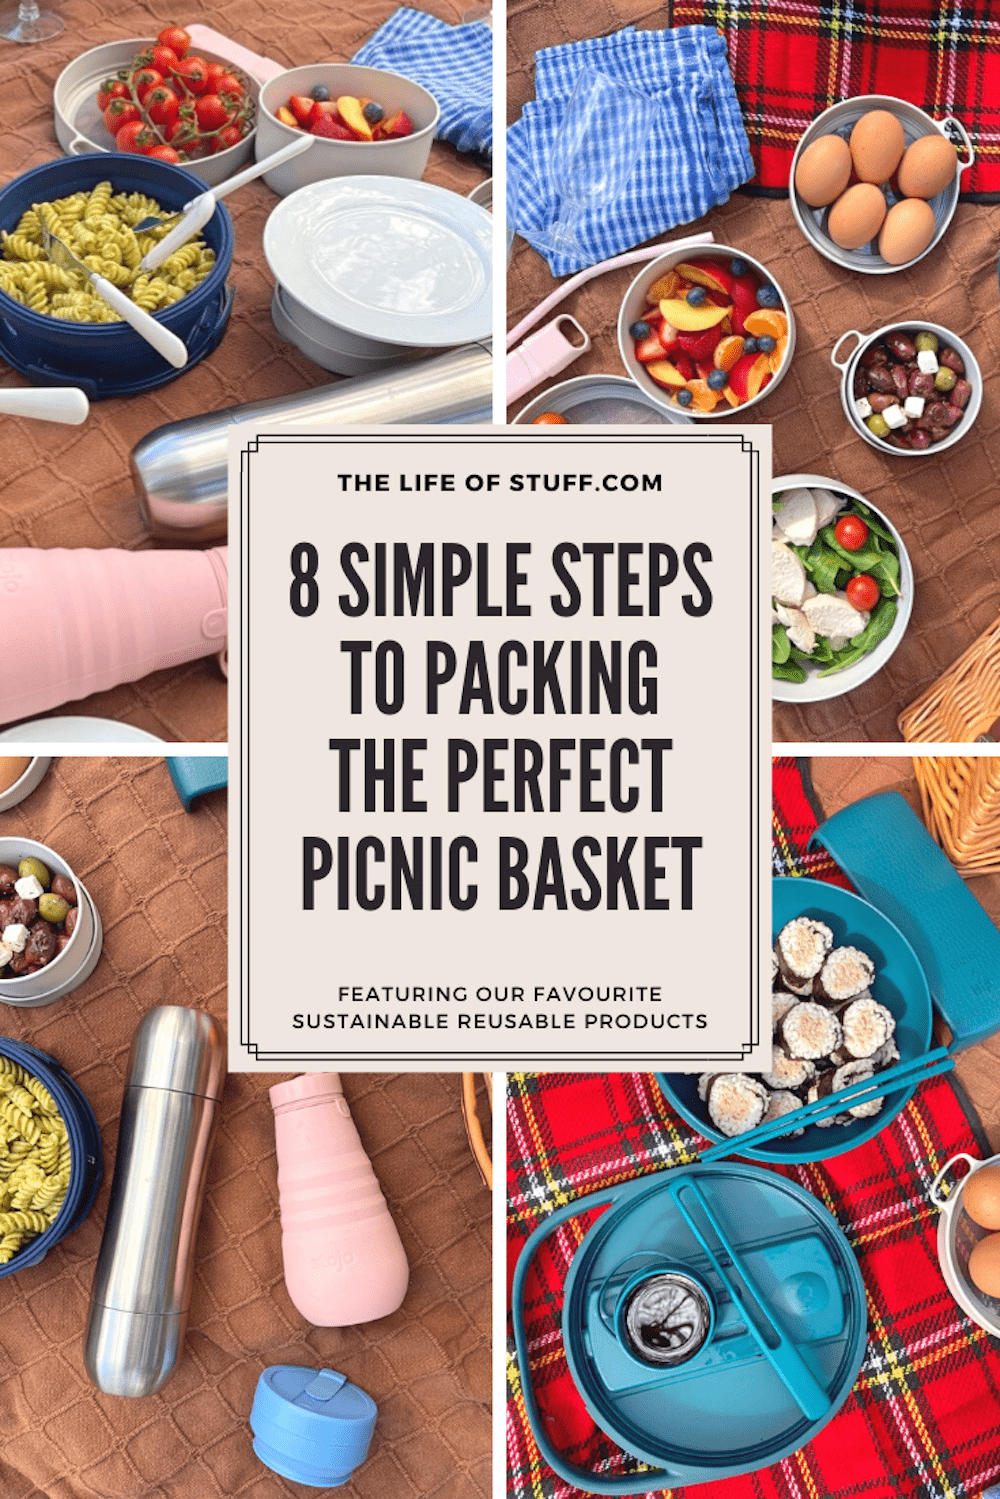 8 Simple Steps To Packing The Perfect Picnic Basket - The Life of Stuff.com